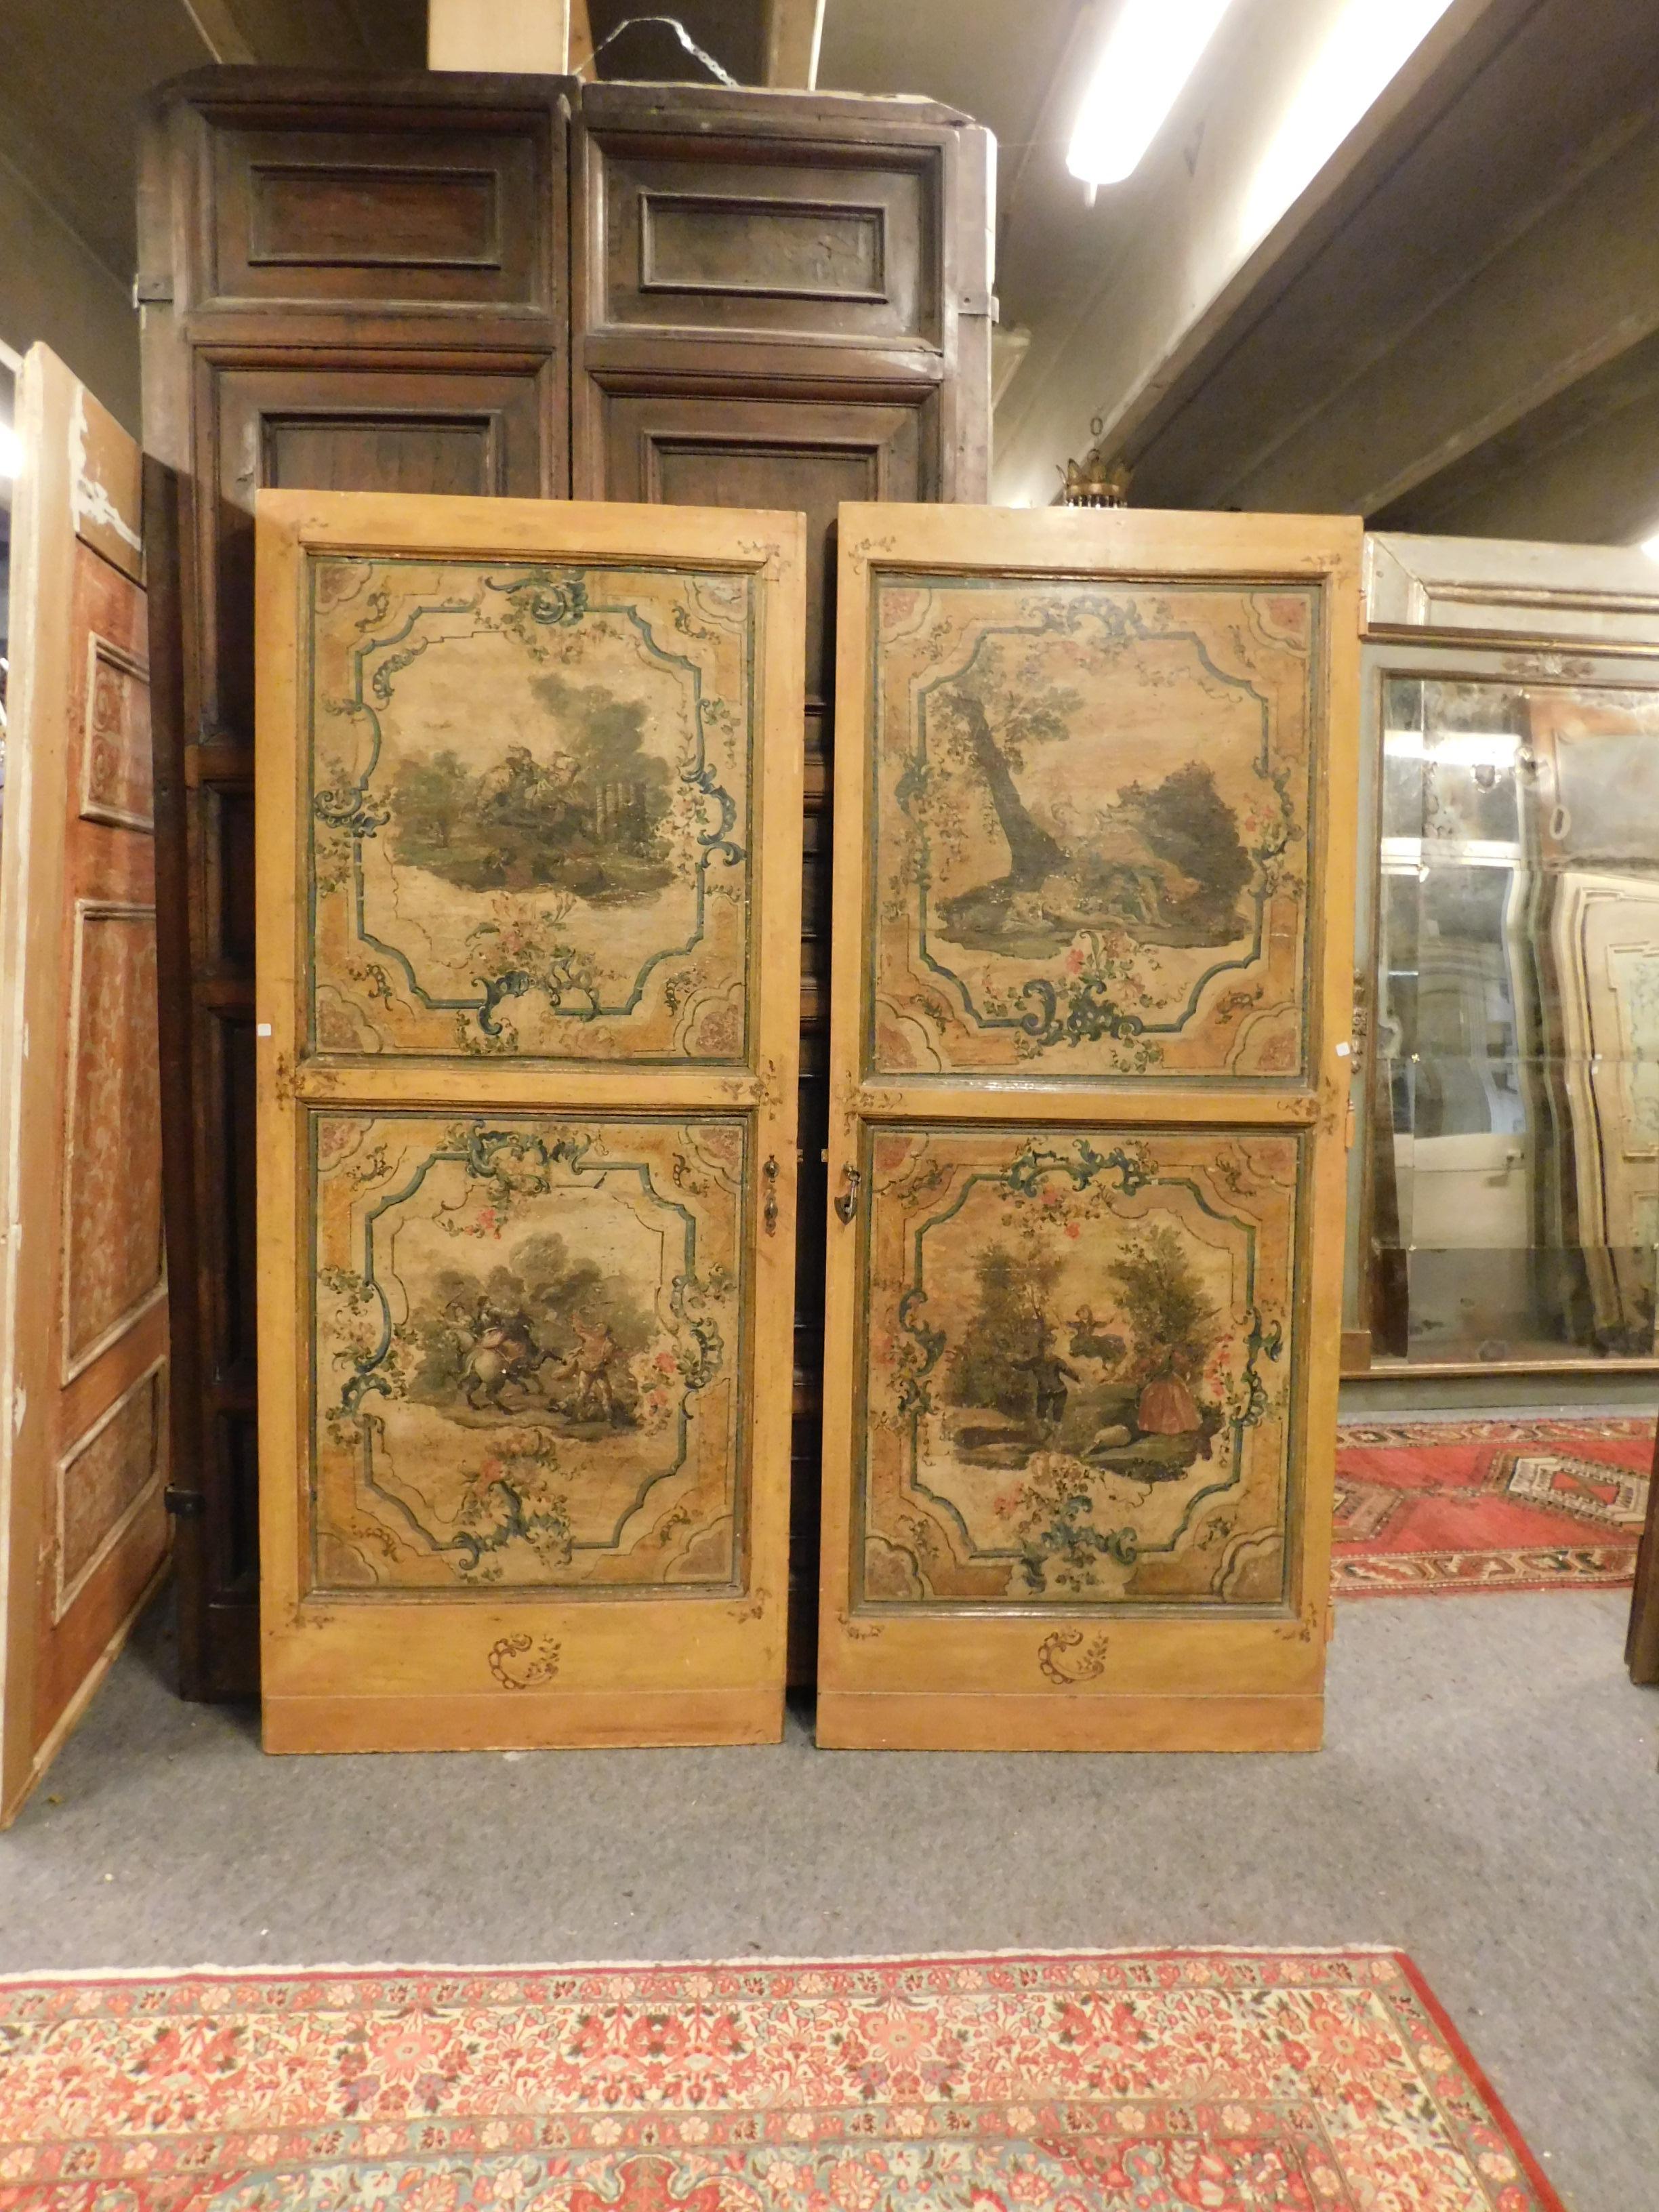 Pair of antique doors, 18th century, from Lombard castle (Italy), lacquered wood and hand painted, bilateral, beautiful on both sides, impossible to find in pairs, completely original with locks and keys, in excellent condition.
Perfect also as